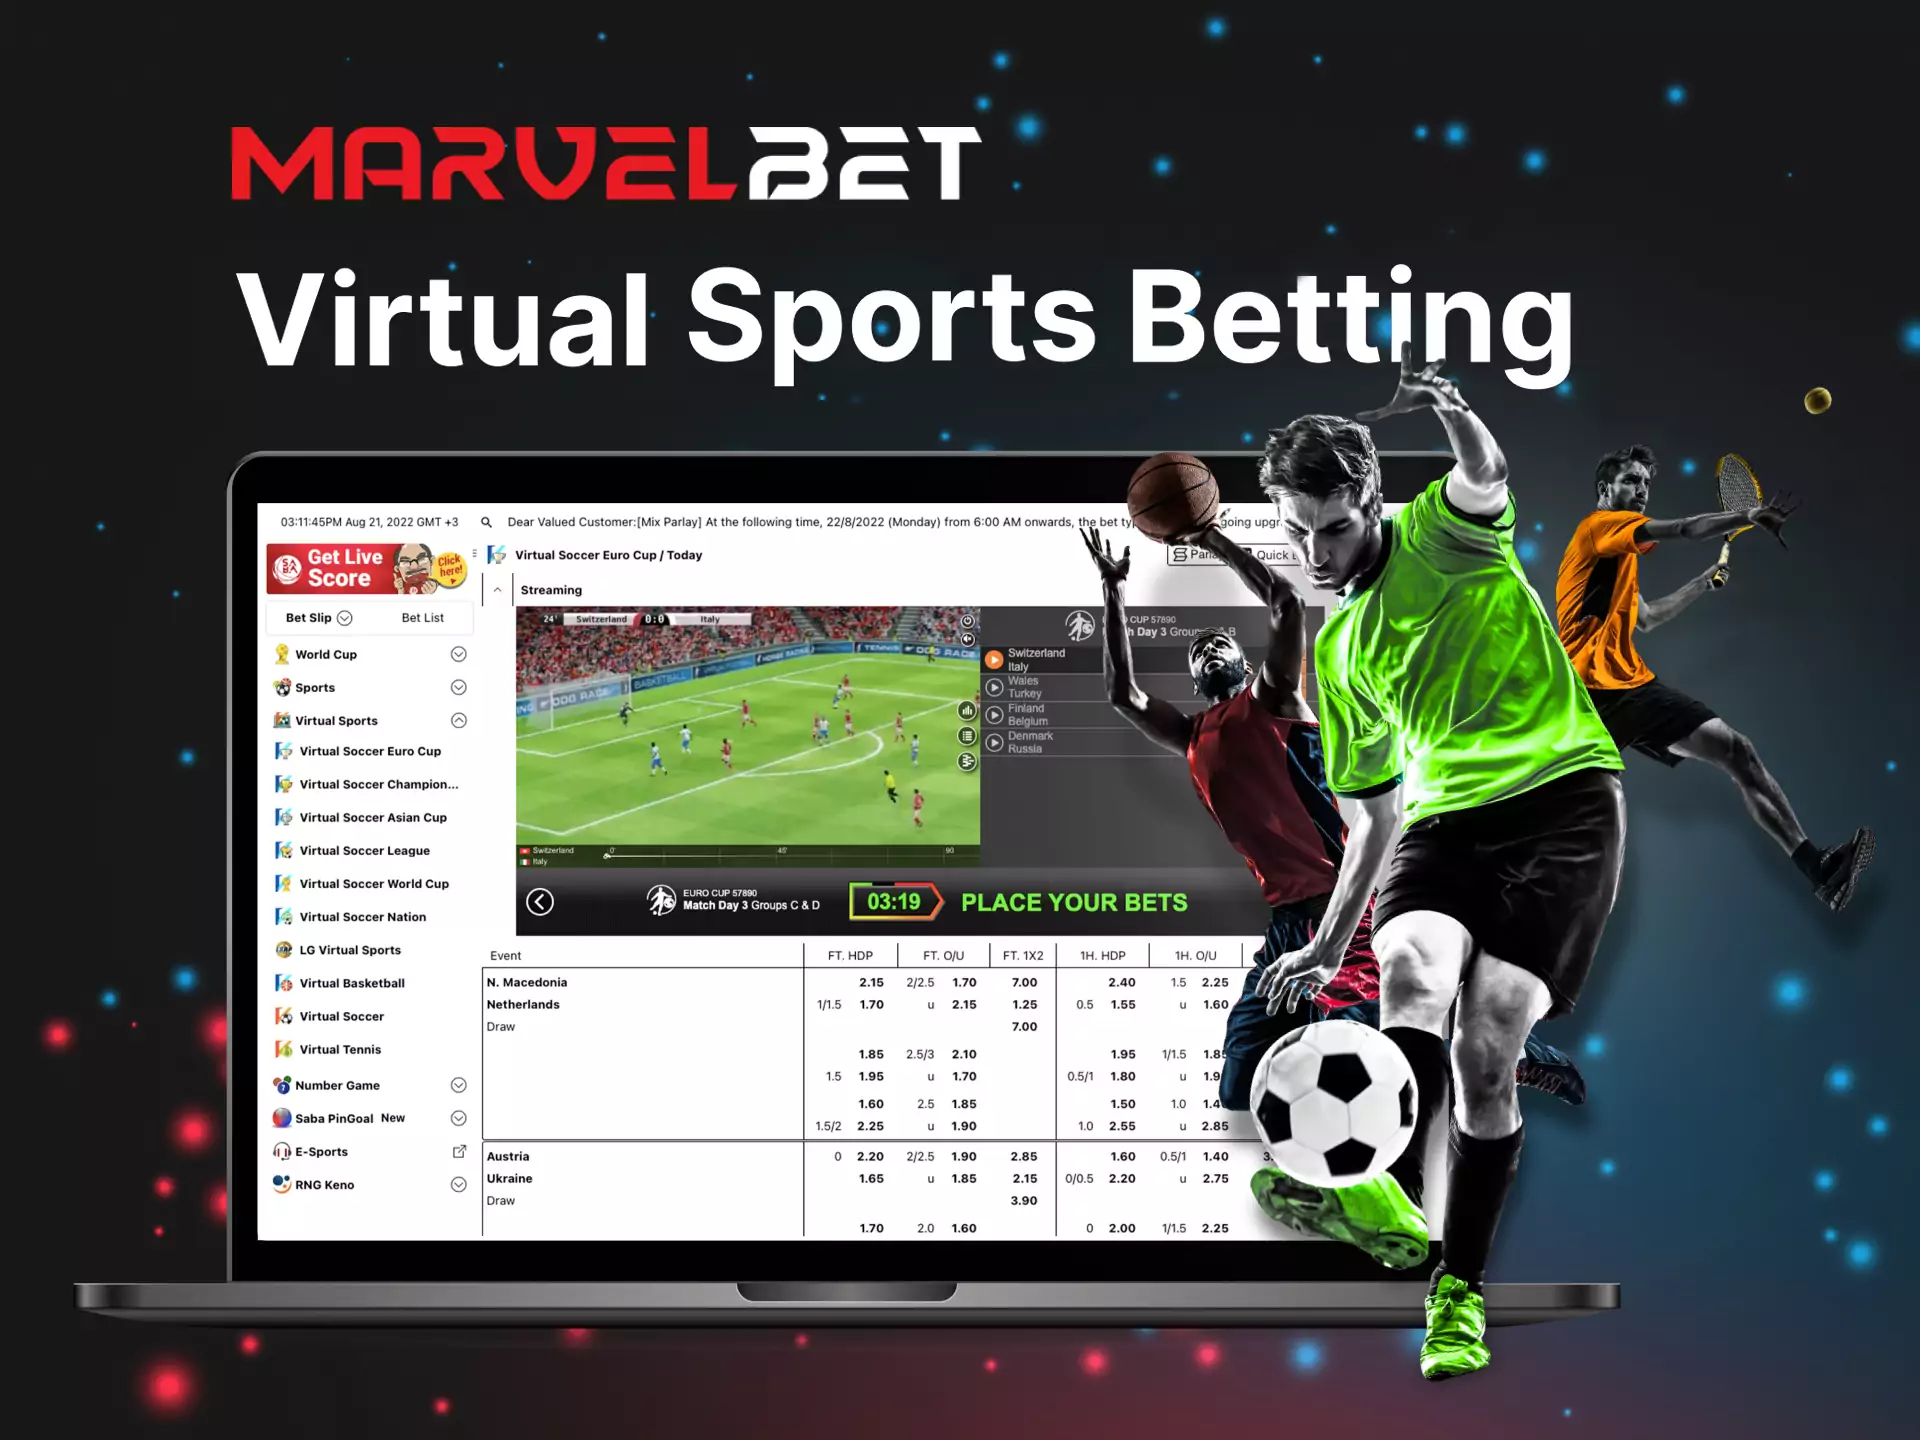 Between real matches, you can place bets on Virtual Sports tournaments.